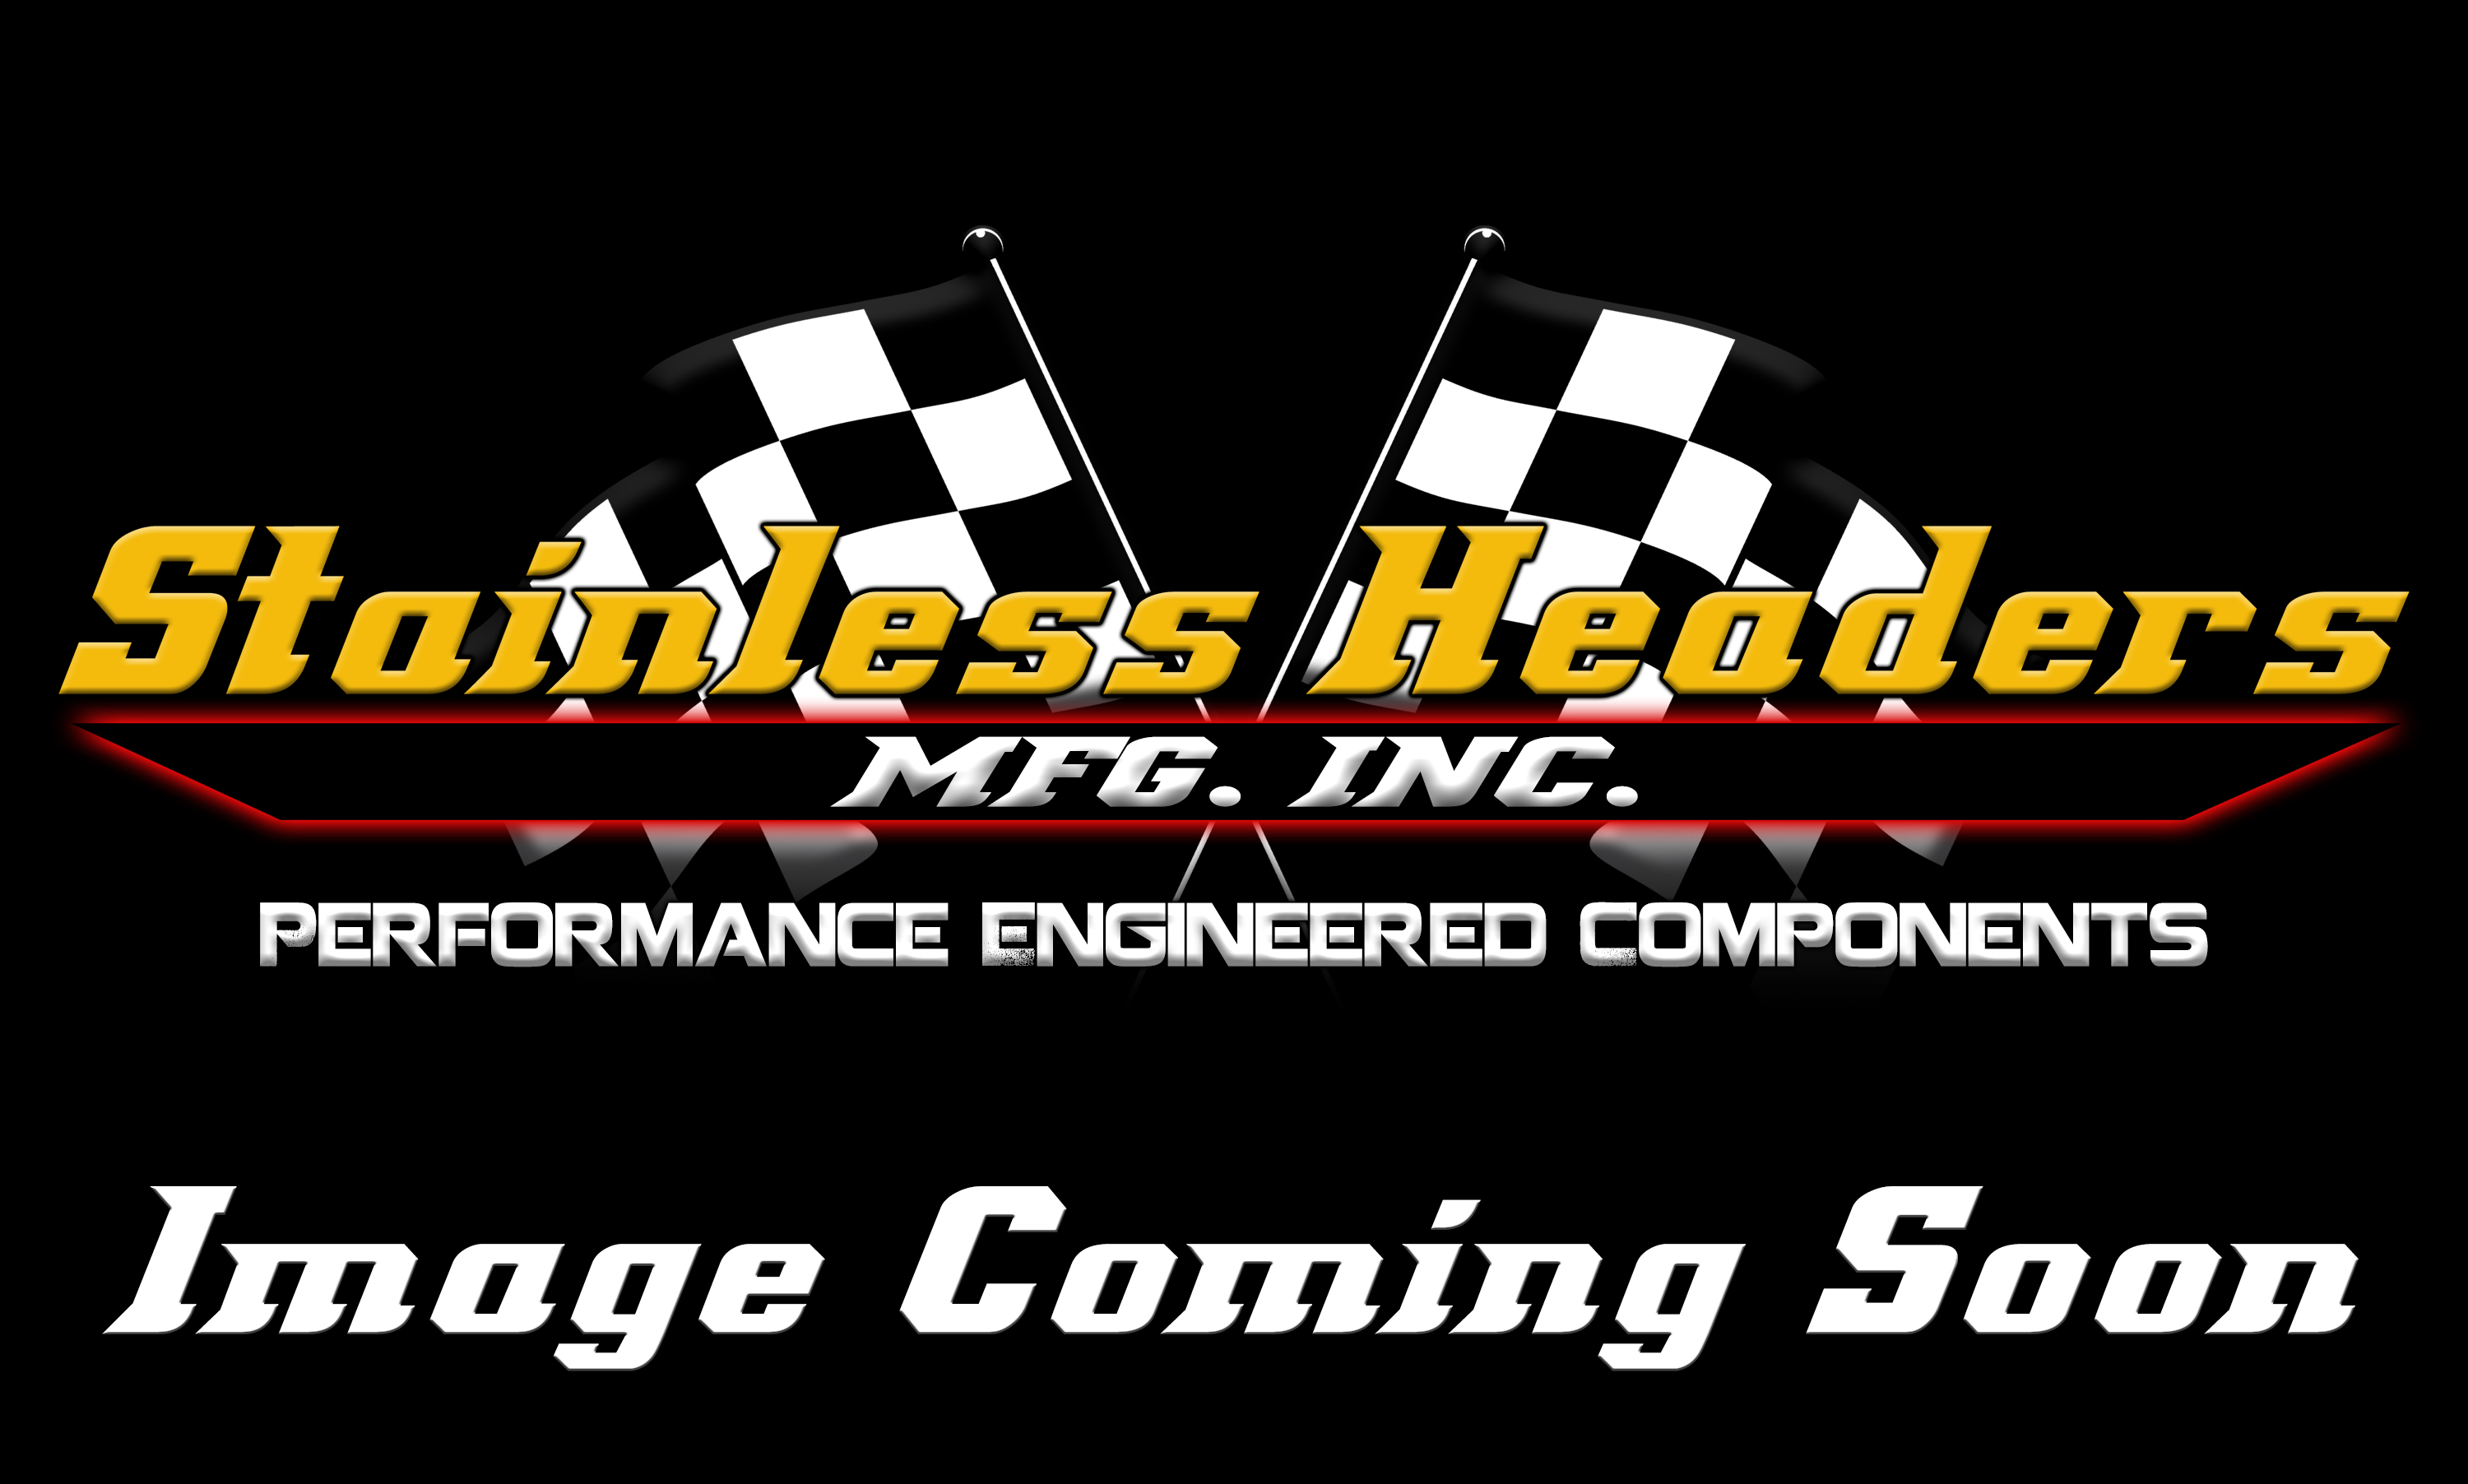 Stainless Headers - 18 Degree Small Block Chevy Turbo Manifold Build Kit - Image 3